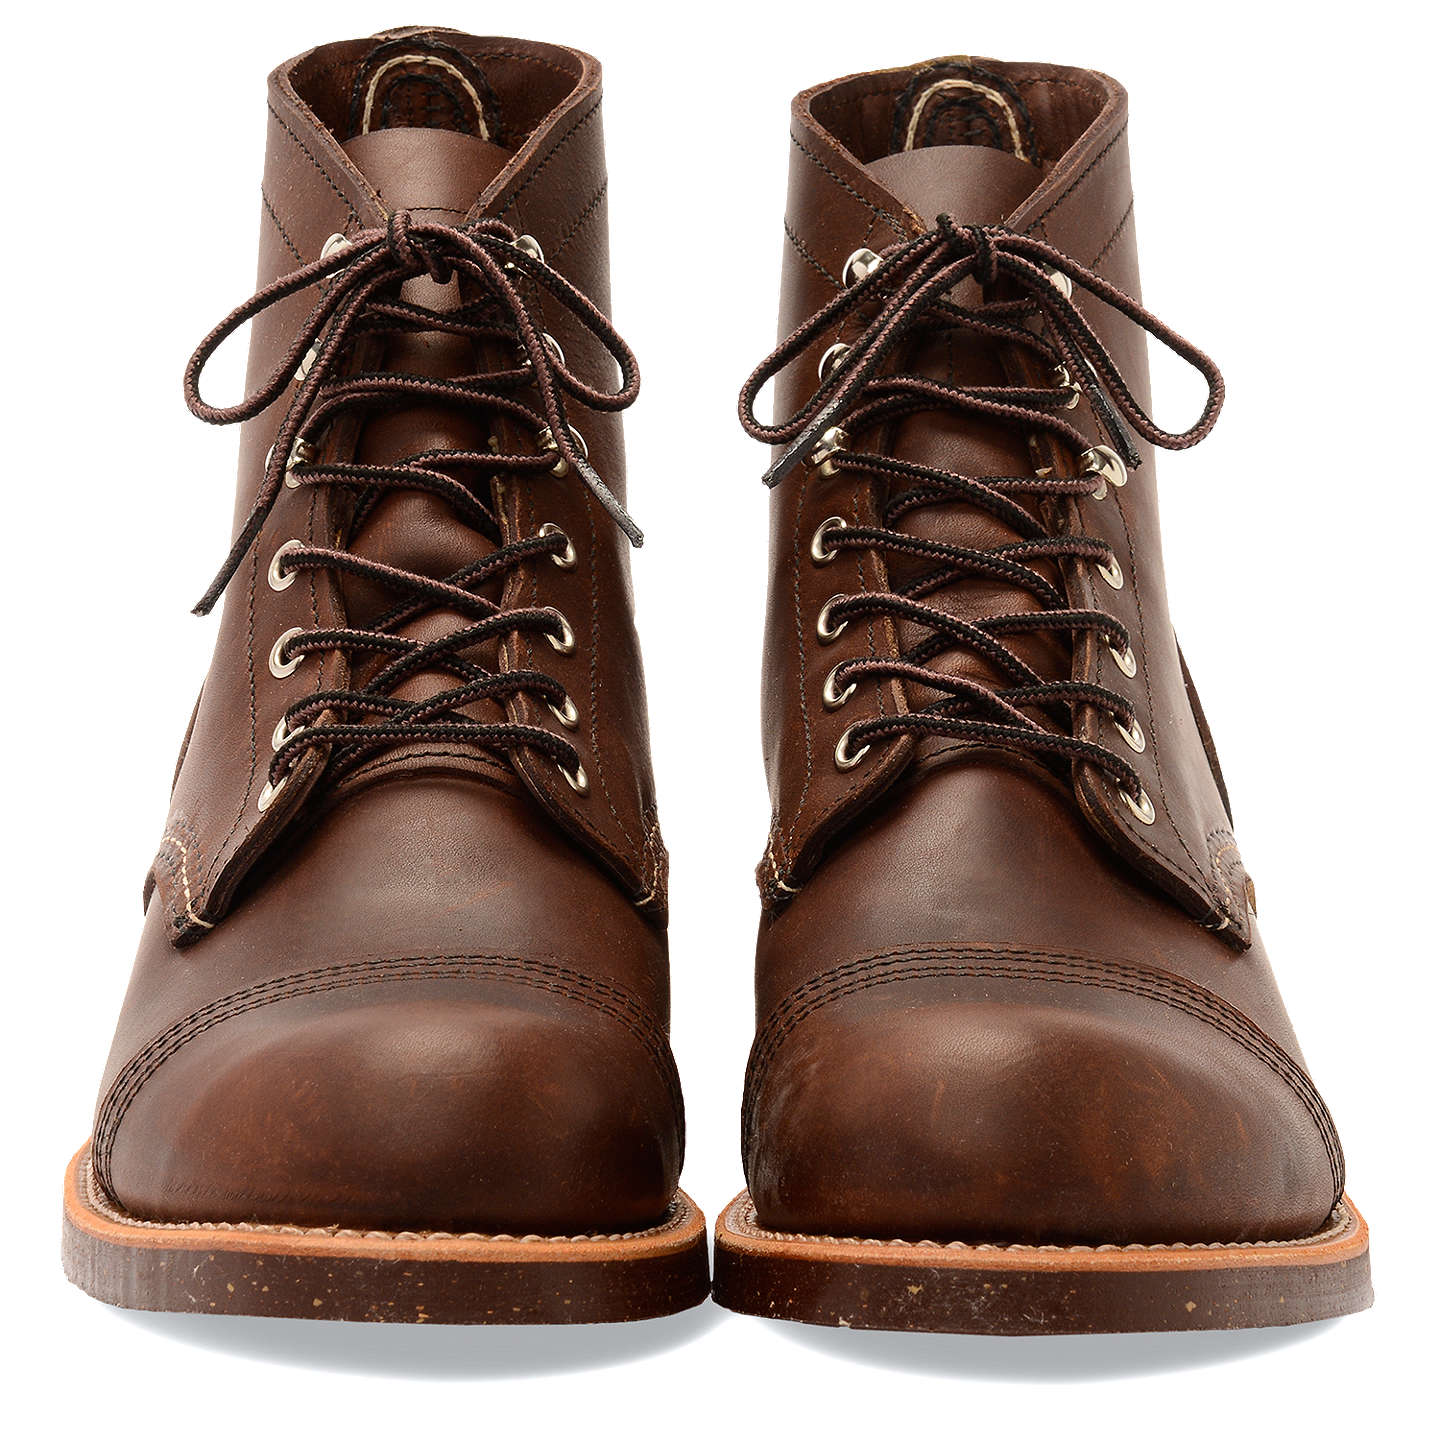 Red Wing 8111 Iron Ranger Boots, Amber Harness at John Lewis